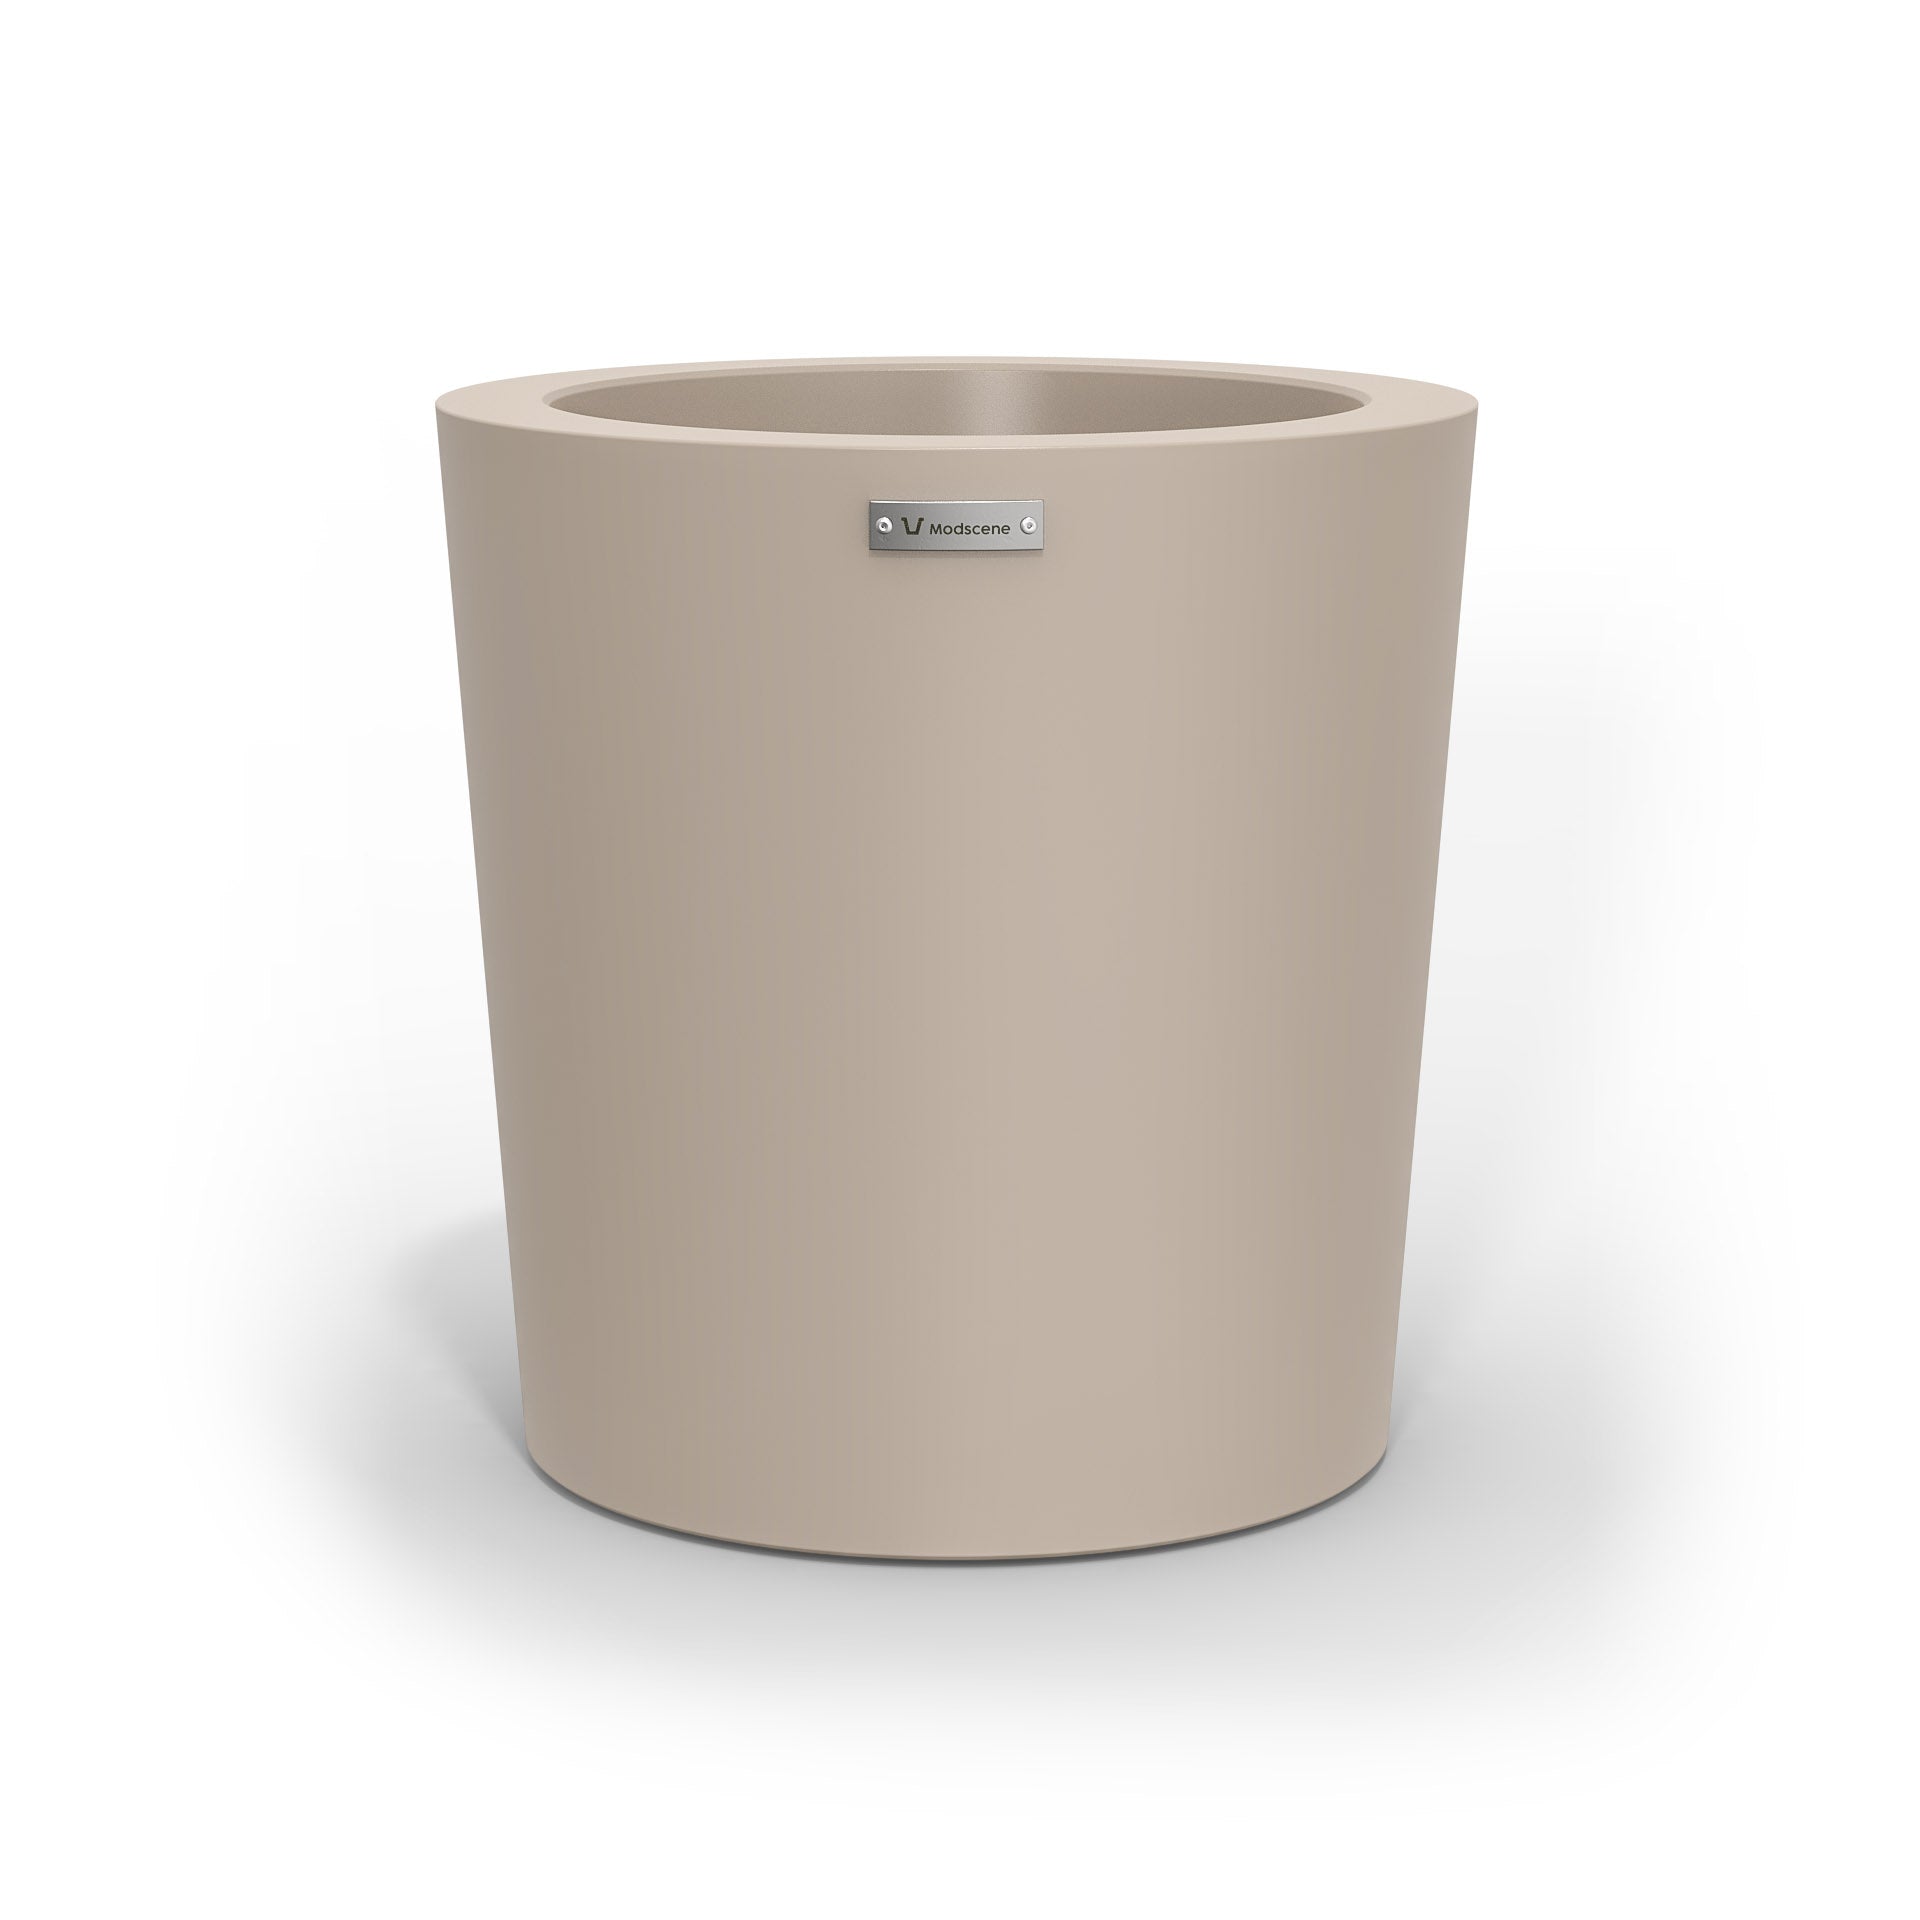 A modern style planter pot in a sandstone colour. Made in NZ.